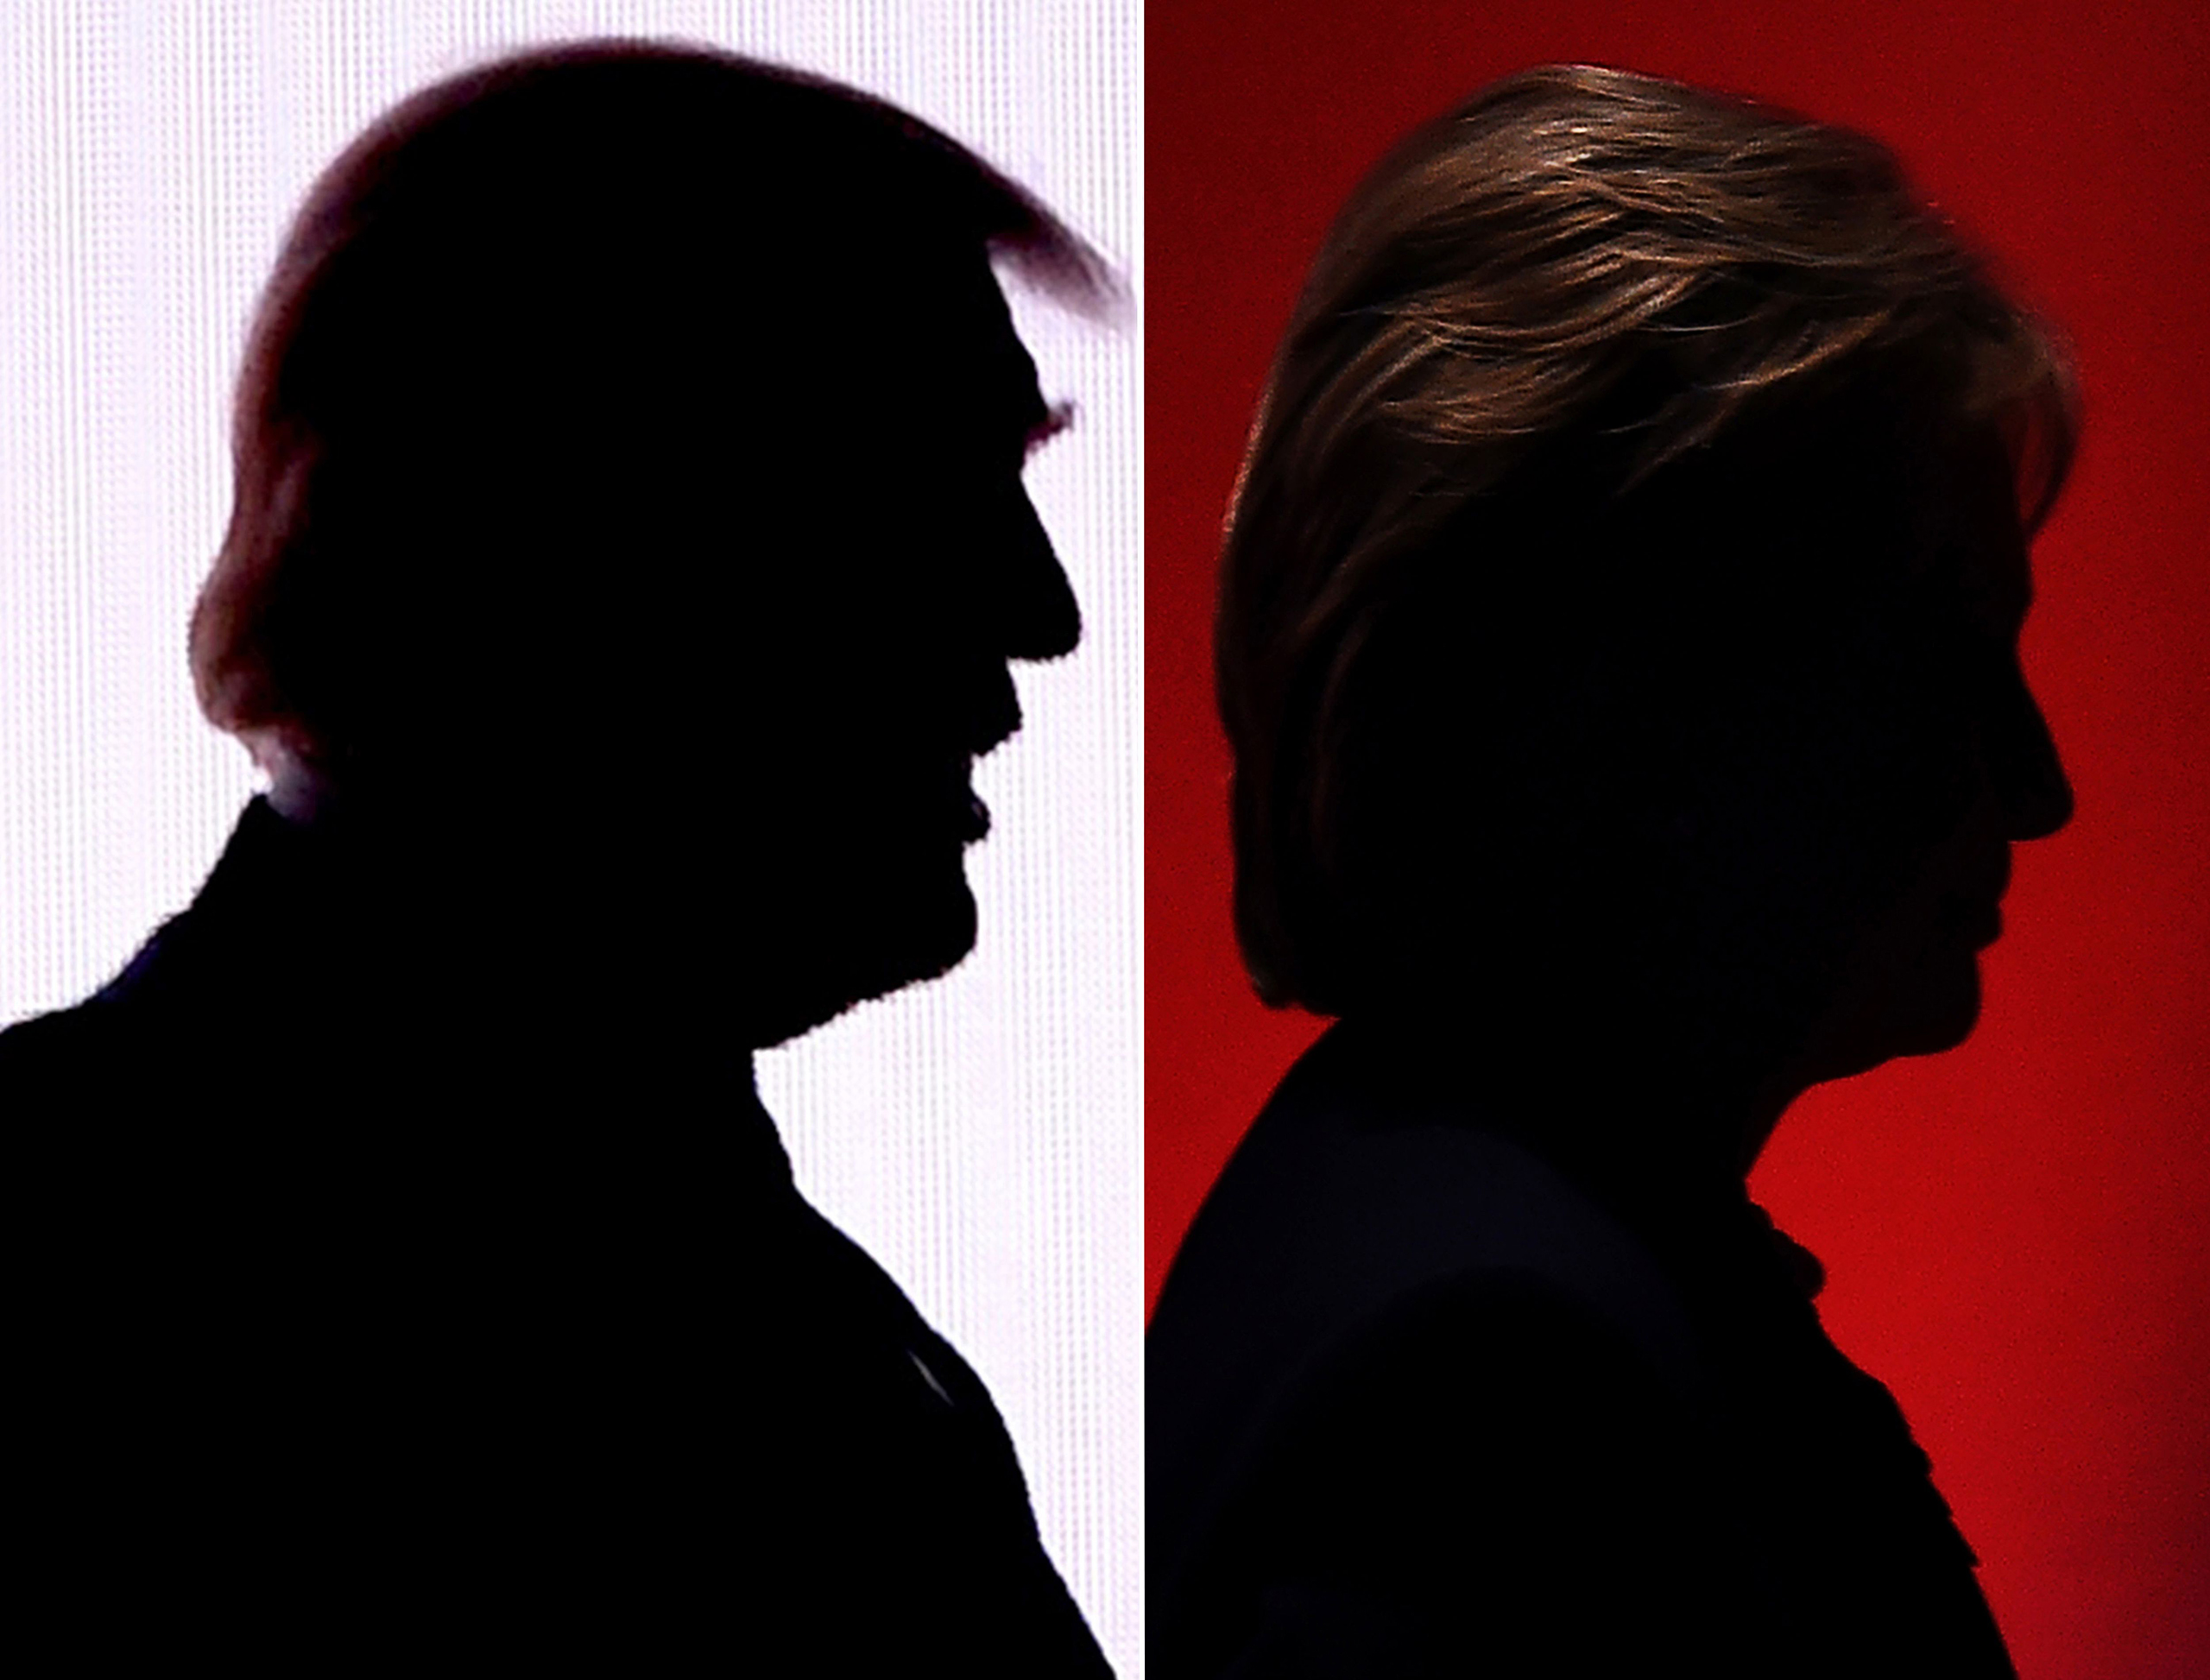 This combination photo shows the silhouettes of Republican presidential nominee Donald Trump on July 18, 2016 and Democratic presidential nominee Hillary Clinton on February 4, 2016. (DESK/AFP/Getty Images)